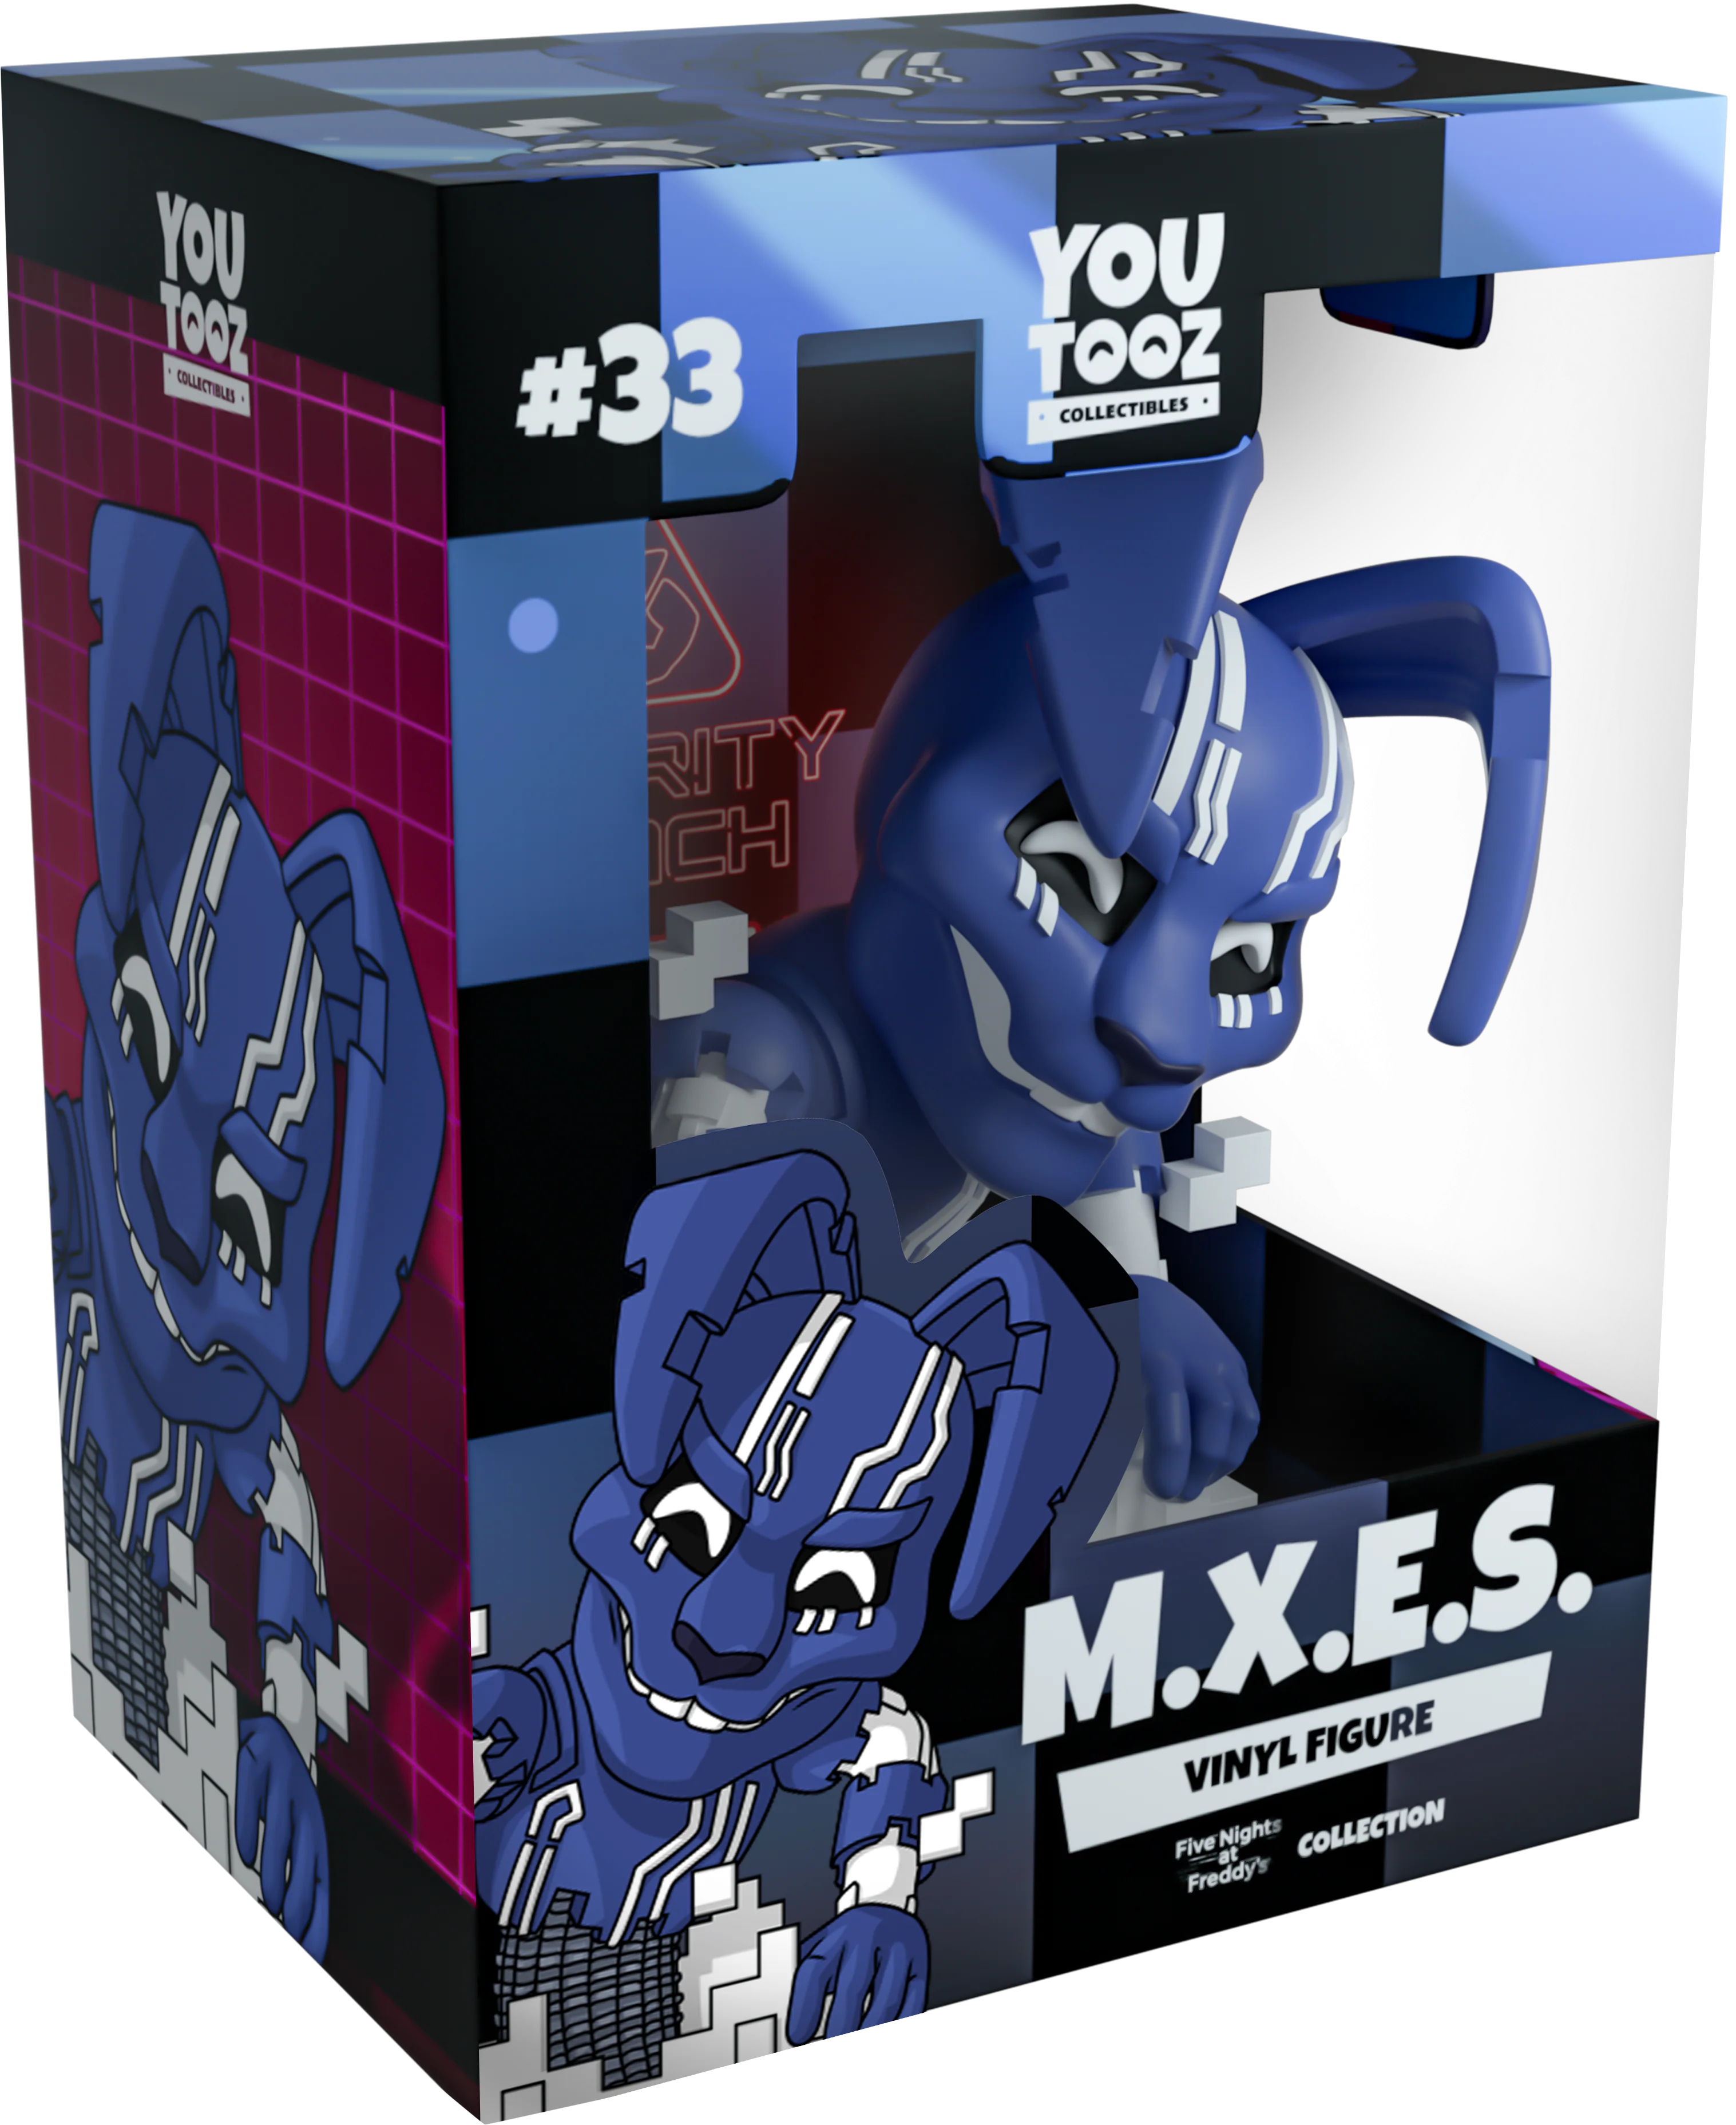 Youtooz Games: Five Nights At Freddys - M.X.E.S.